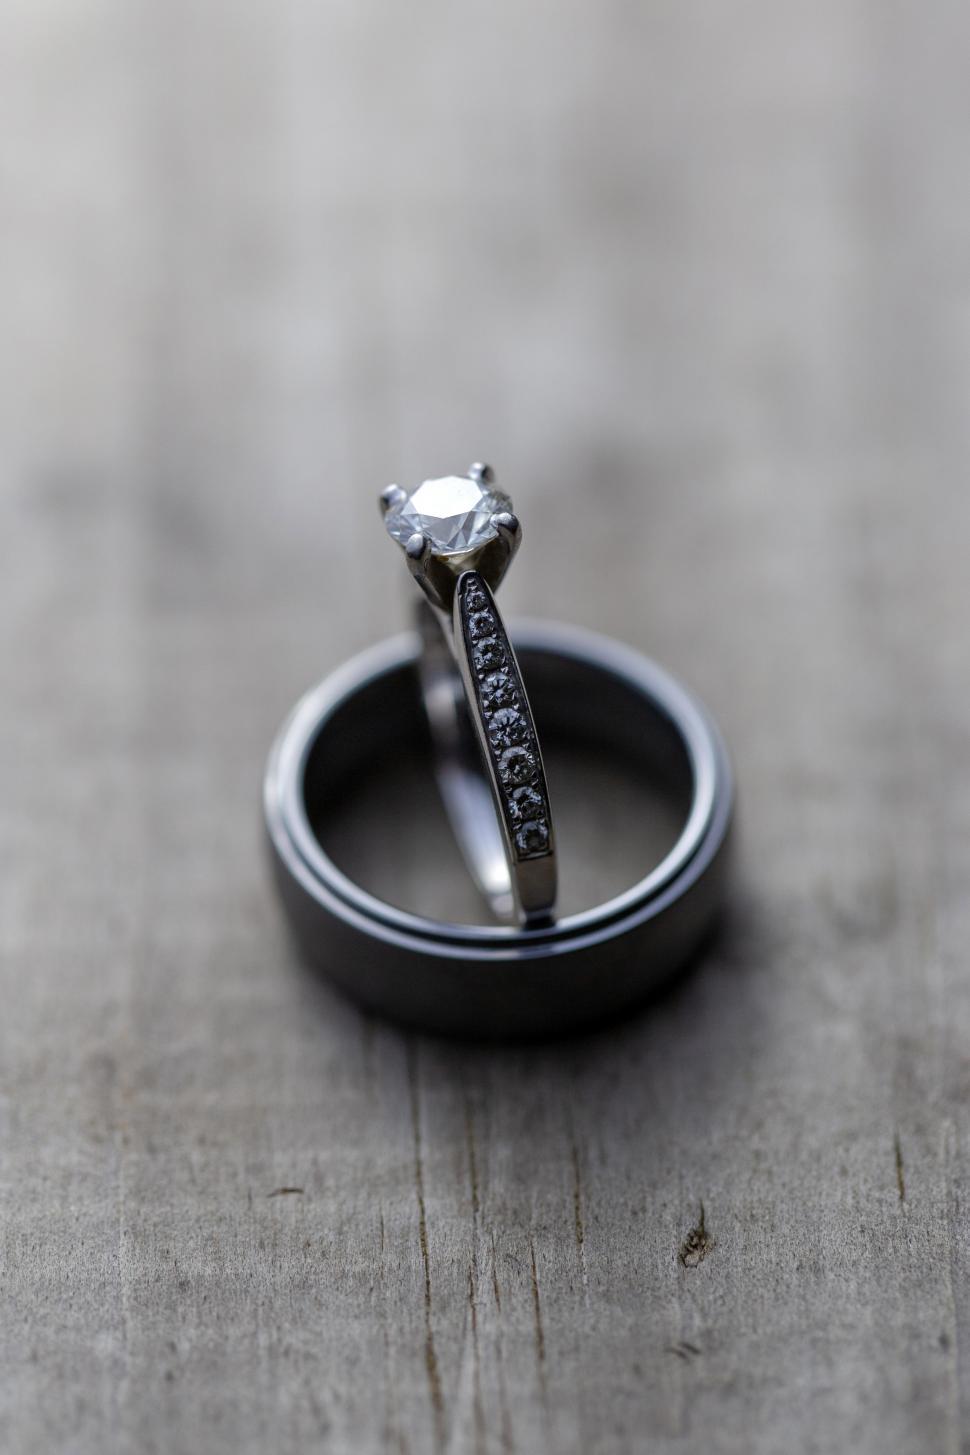 Free Image of A ring on a ring 